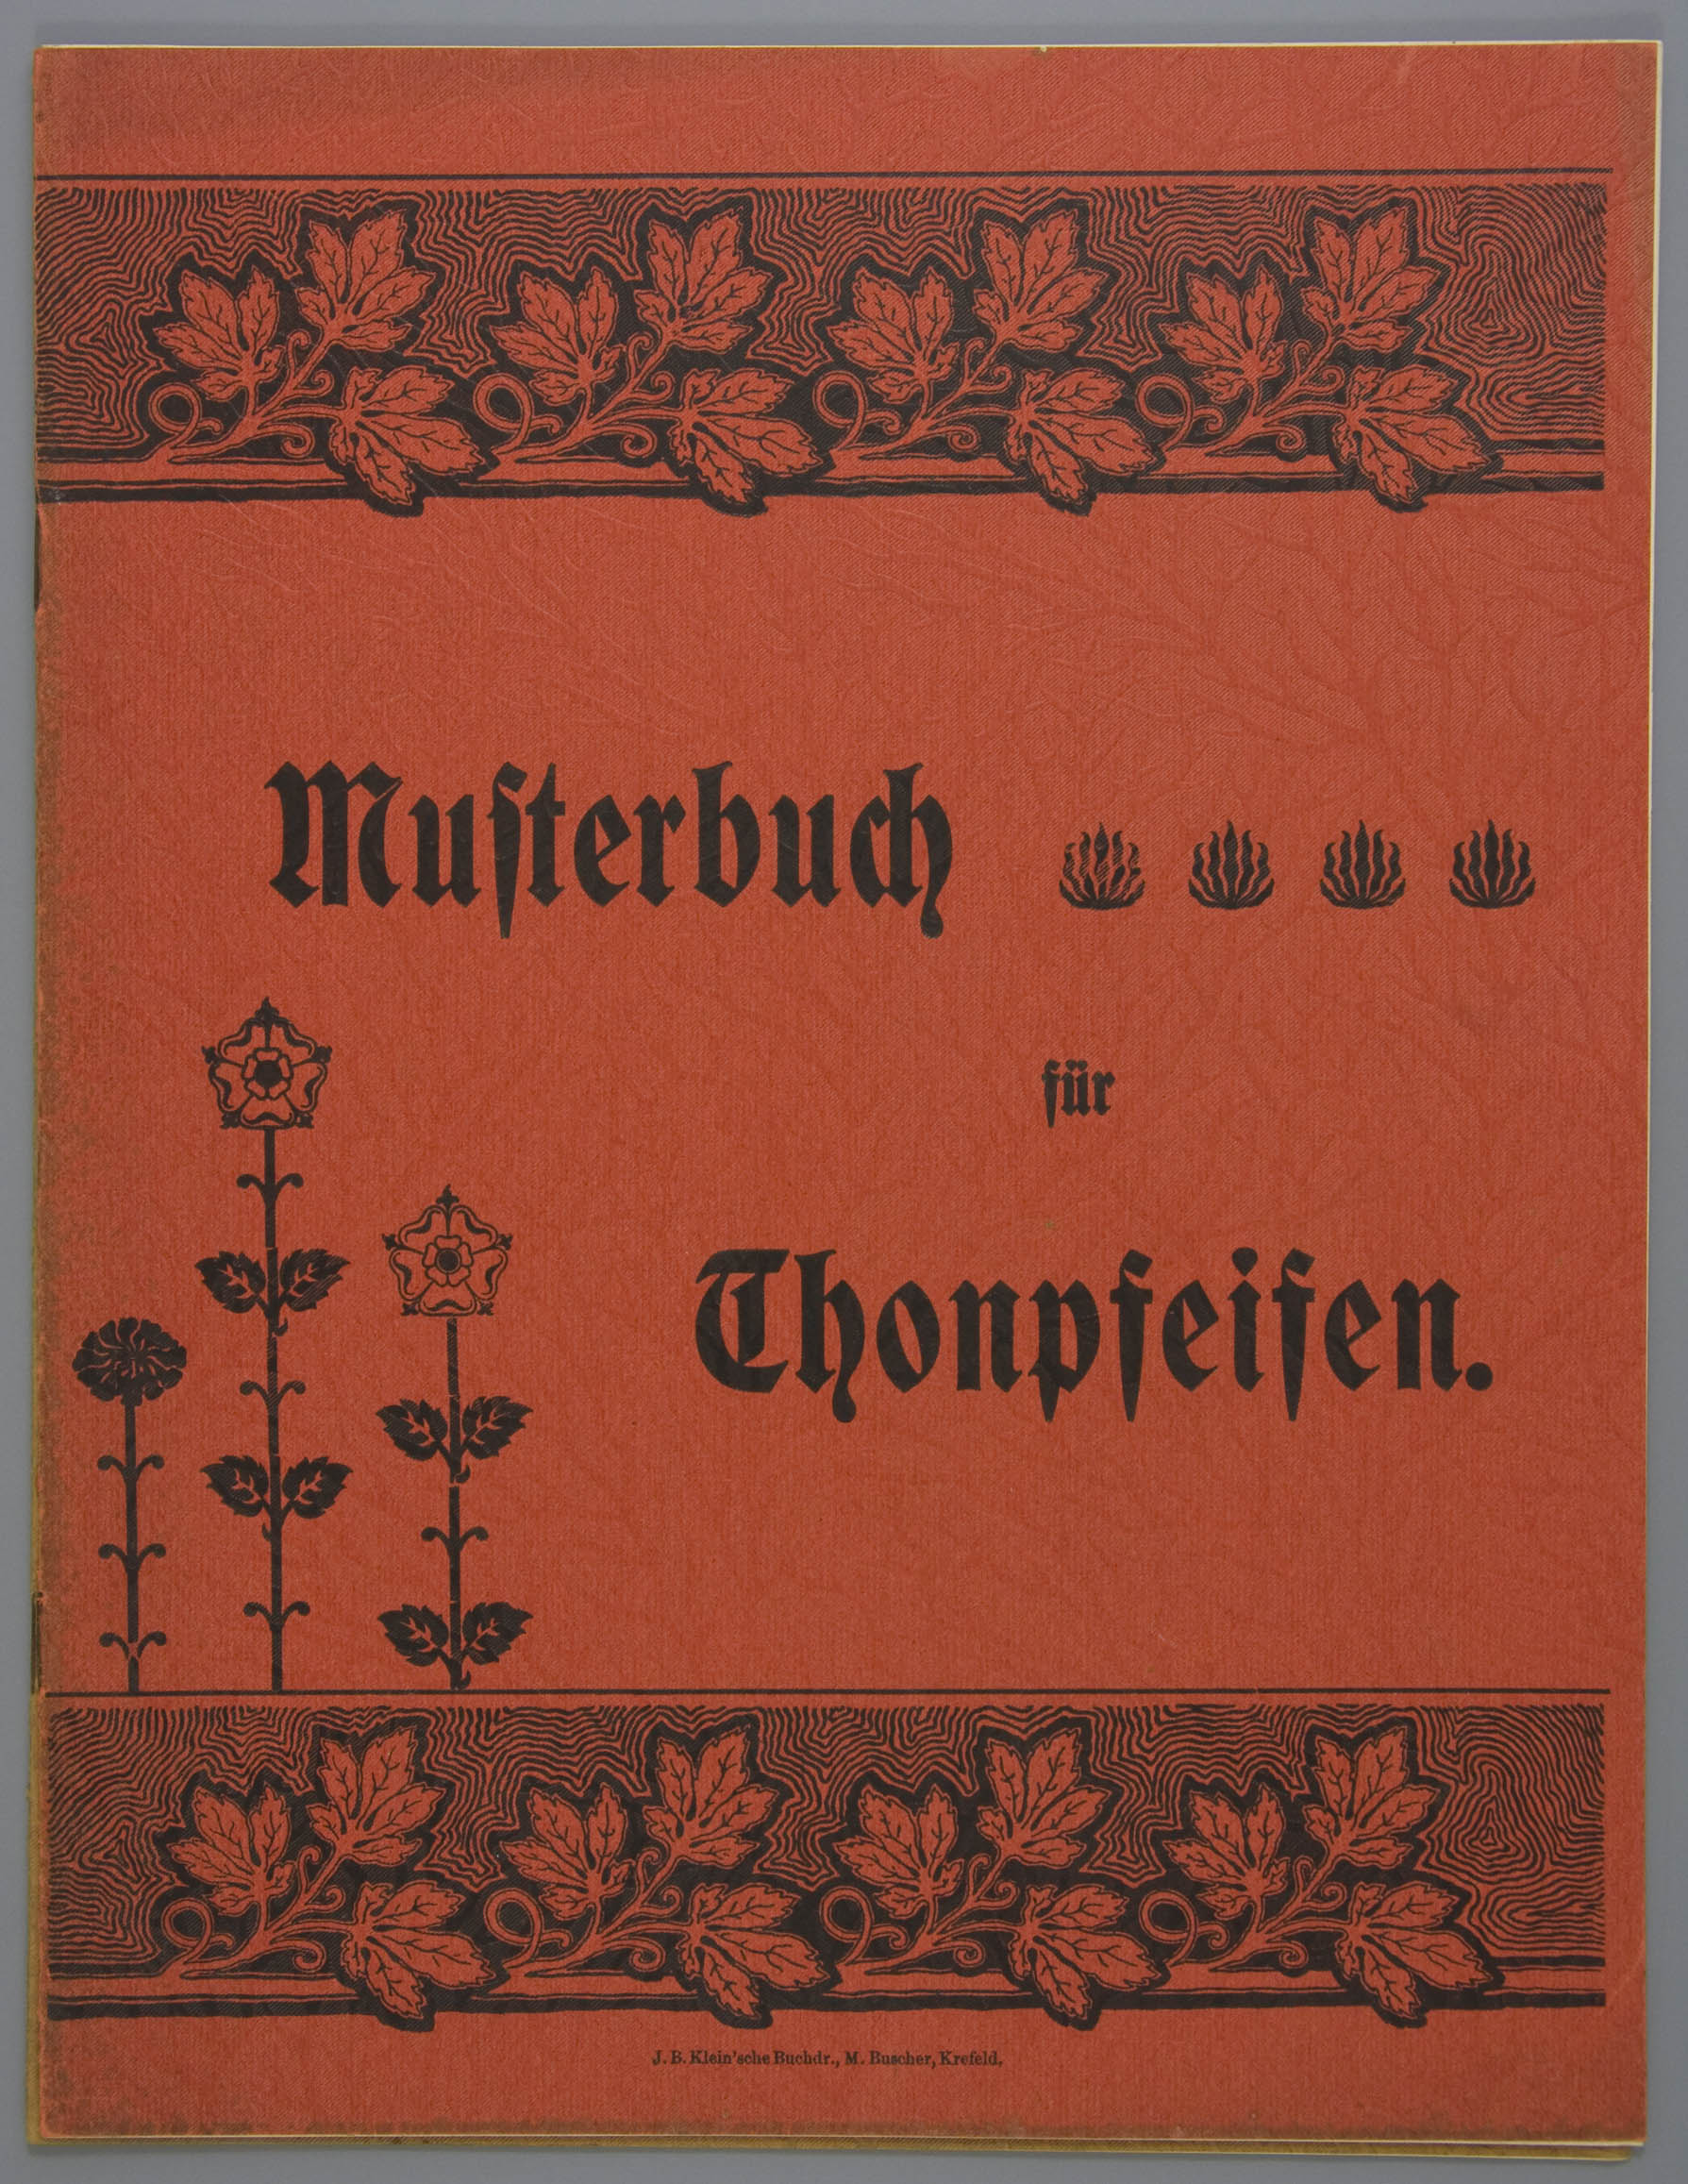 53-19.352a-westerwald-catalogue-musterbuch-01